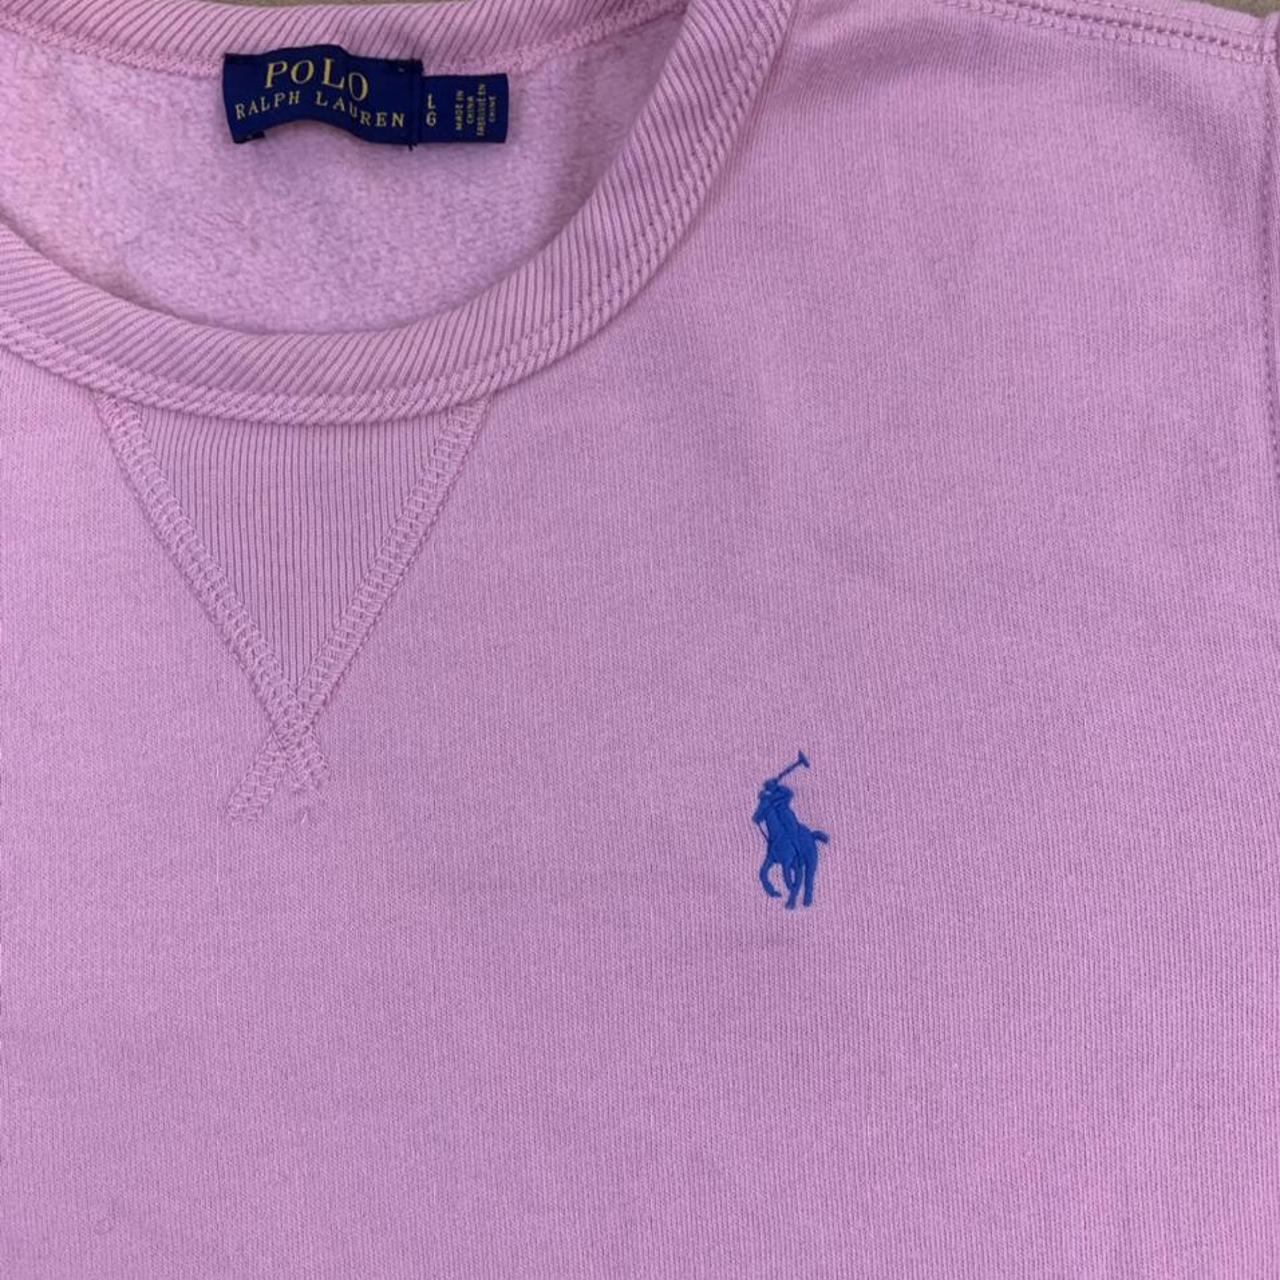 Product Image 2 - Vintage POLO RALPH LAUREN Small